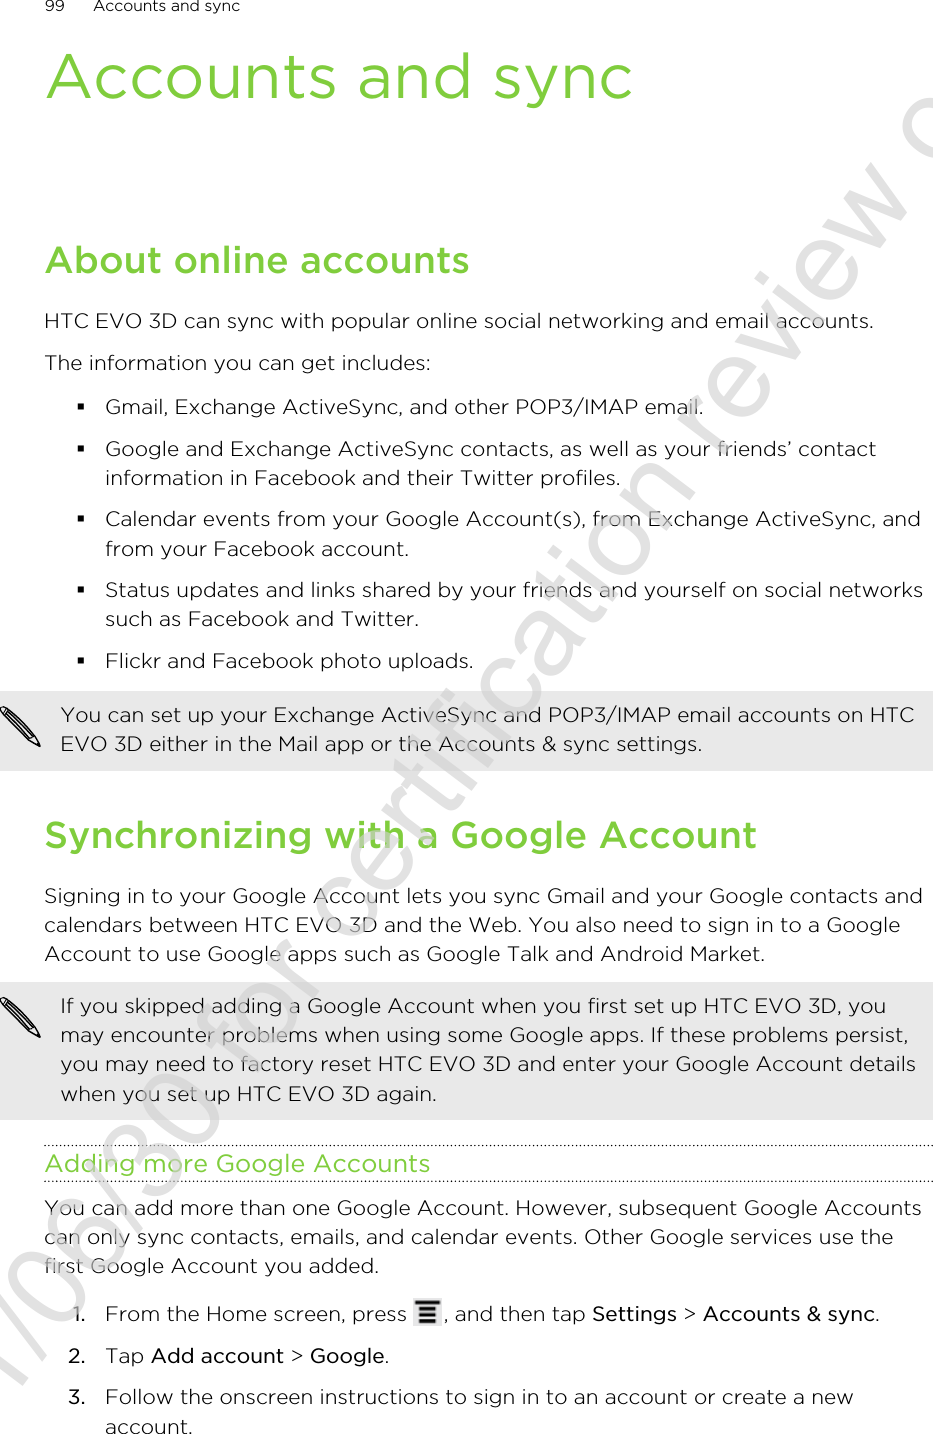 Accounts and syncAbout online accountsHTC EVO 3D can sync with popular online social networking and email accounts.The information you can get includes:§Gmail, Exchange ActiveSync, and other POP3/IMAP email.§Google and Exchange ActiveSync contacts, as well as your friends’ contactinformation in Facebook and their Twitter profiles.§Calendar events from your Google Account(s), from Exchange ActiveSync, andfrom your Facebook account.§Status updates and links shared by your friends and yourself on social networkssuch as Facebook and Twitter.§Flickr and Facebook photo uploads.You can set up your Exchange ActiveSync and POP3/IMAP email accounts on HTCEVO 3D either in the Mail app or the Accounts &amp; sync settings.Synchronizing with a Google AccountSigning in to your Google Account lets you sync Gmail and your Google contacts andcalendars between HTC EVO 3D and the Web. You also need to sign in to a GoogleAccount to use Google apps such as Google Talk and Android Market.If you skipped adding a Google Account when you first set up HTC EVO 3D, youmay encounter problems when using some Google apps. If these problems persist,you may need to factory reset HTC EVO 3D and enter your Google Account detailswhen you set up HTC EVO 3D again.Adding more Google AccountsYou can add more than one Google Account. However, subsequent Google Accountscan only sync contacts, emails, and calendar events. Other Google services use thefirst Google Account you added.1. From the Home screen, press  , and then tap Settings &gt; Accounts &amp; sync.2. Tap Add account &gt; Google.3. Follow the onscreen instructions to sign in to an account or create a newaccount.99 Accounts and sync2011/06/30 for certification review only